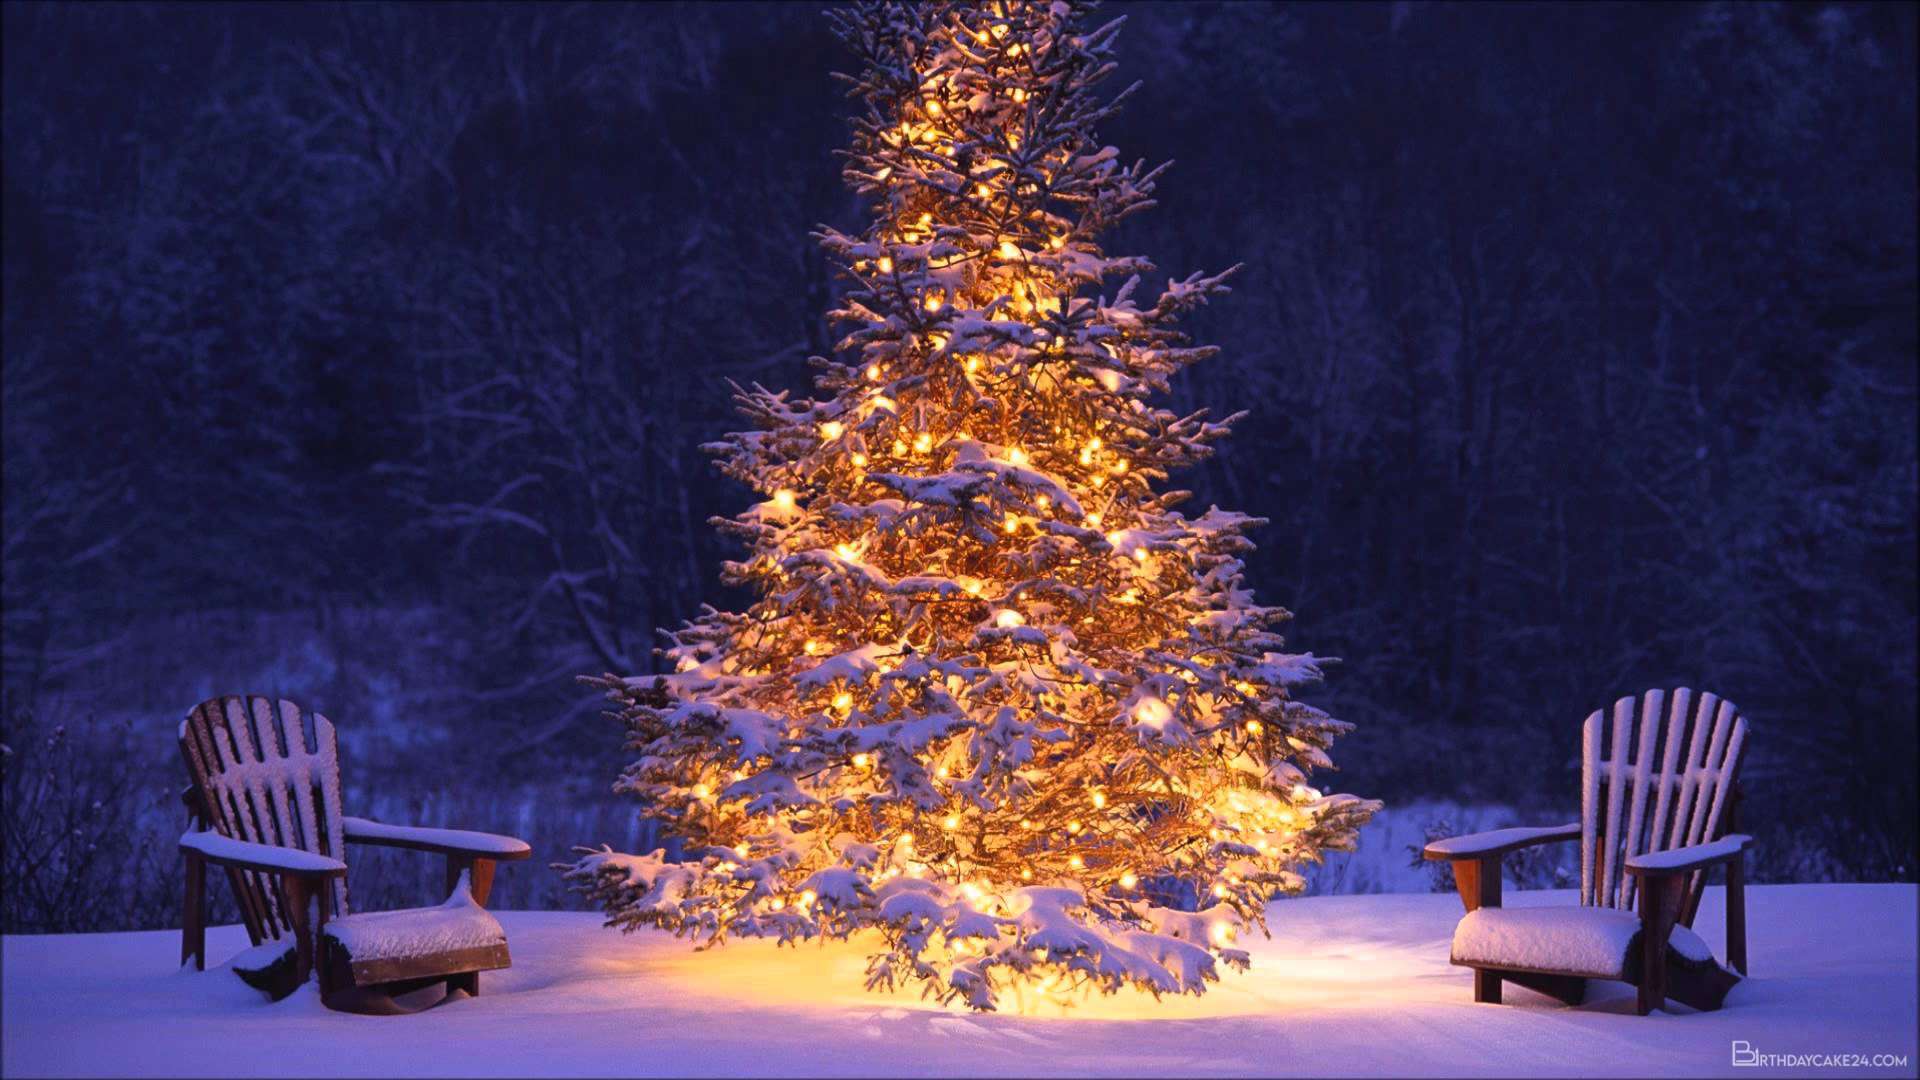 Background Merry Christmas Wallpaper Download 2022 Full HD